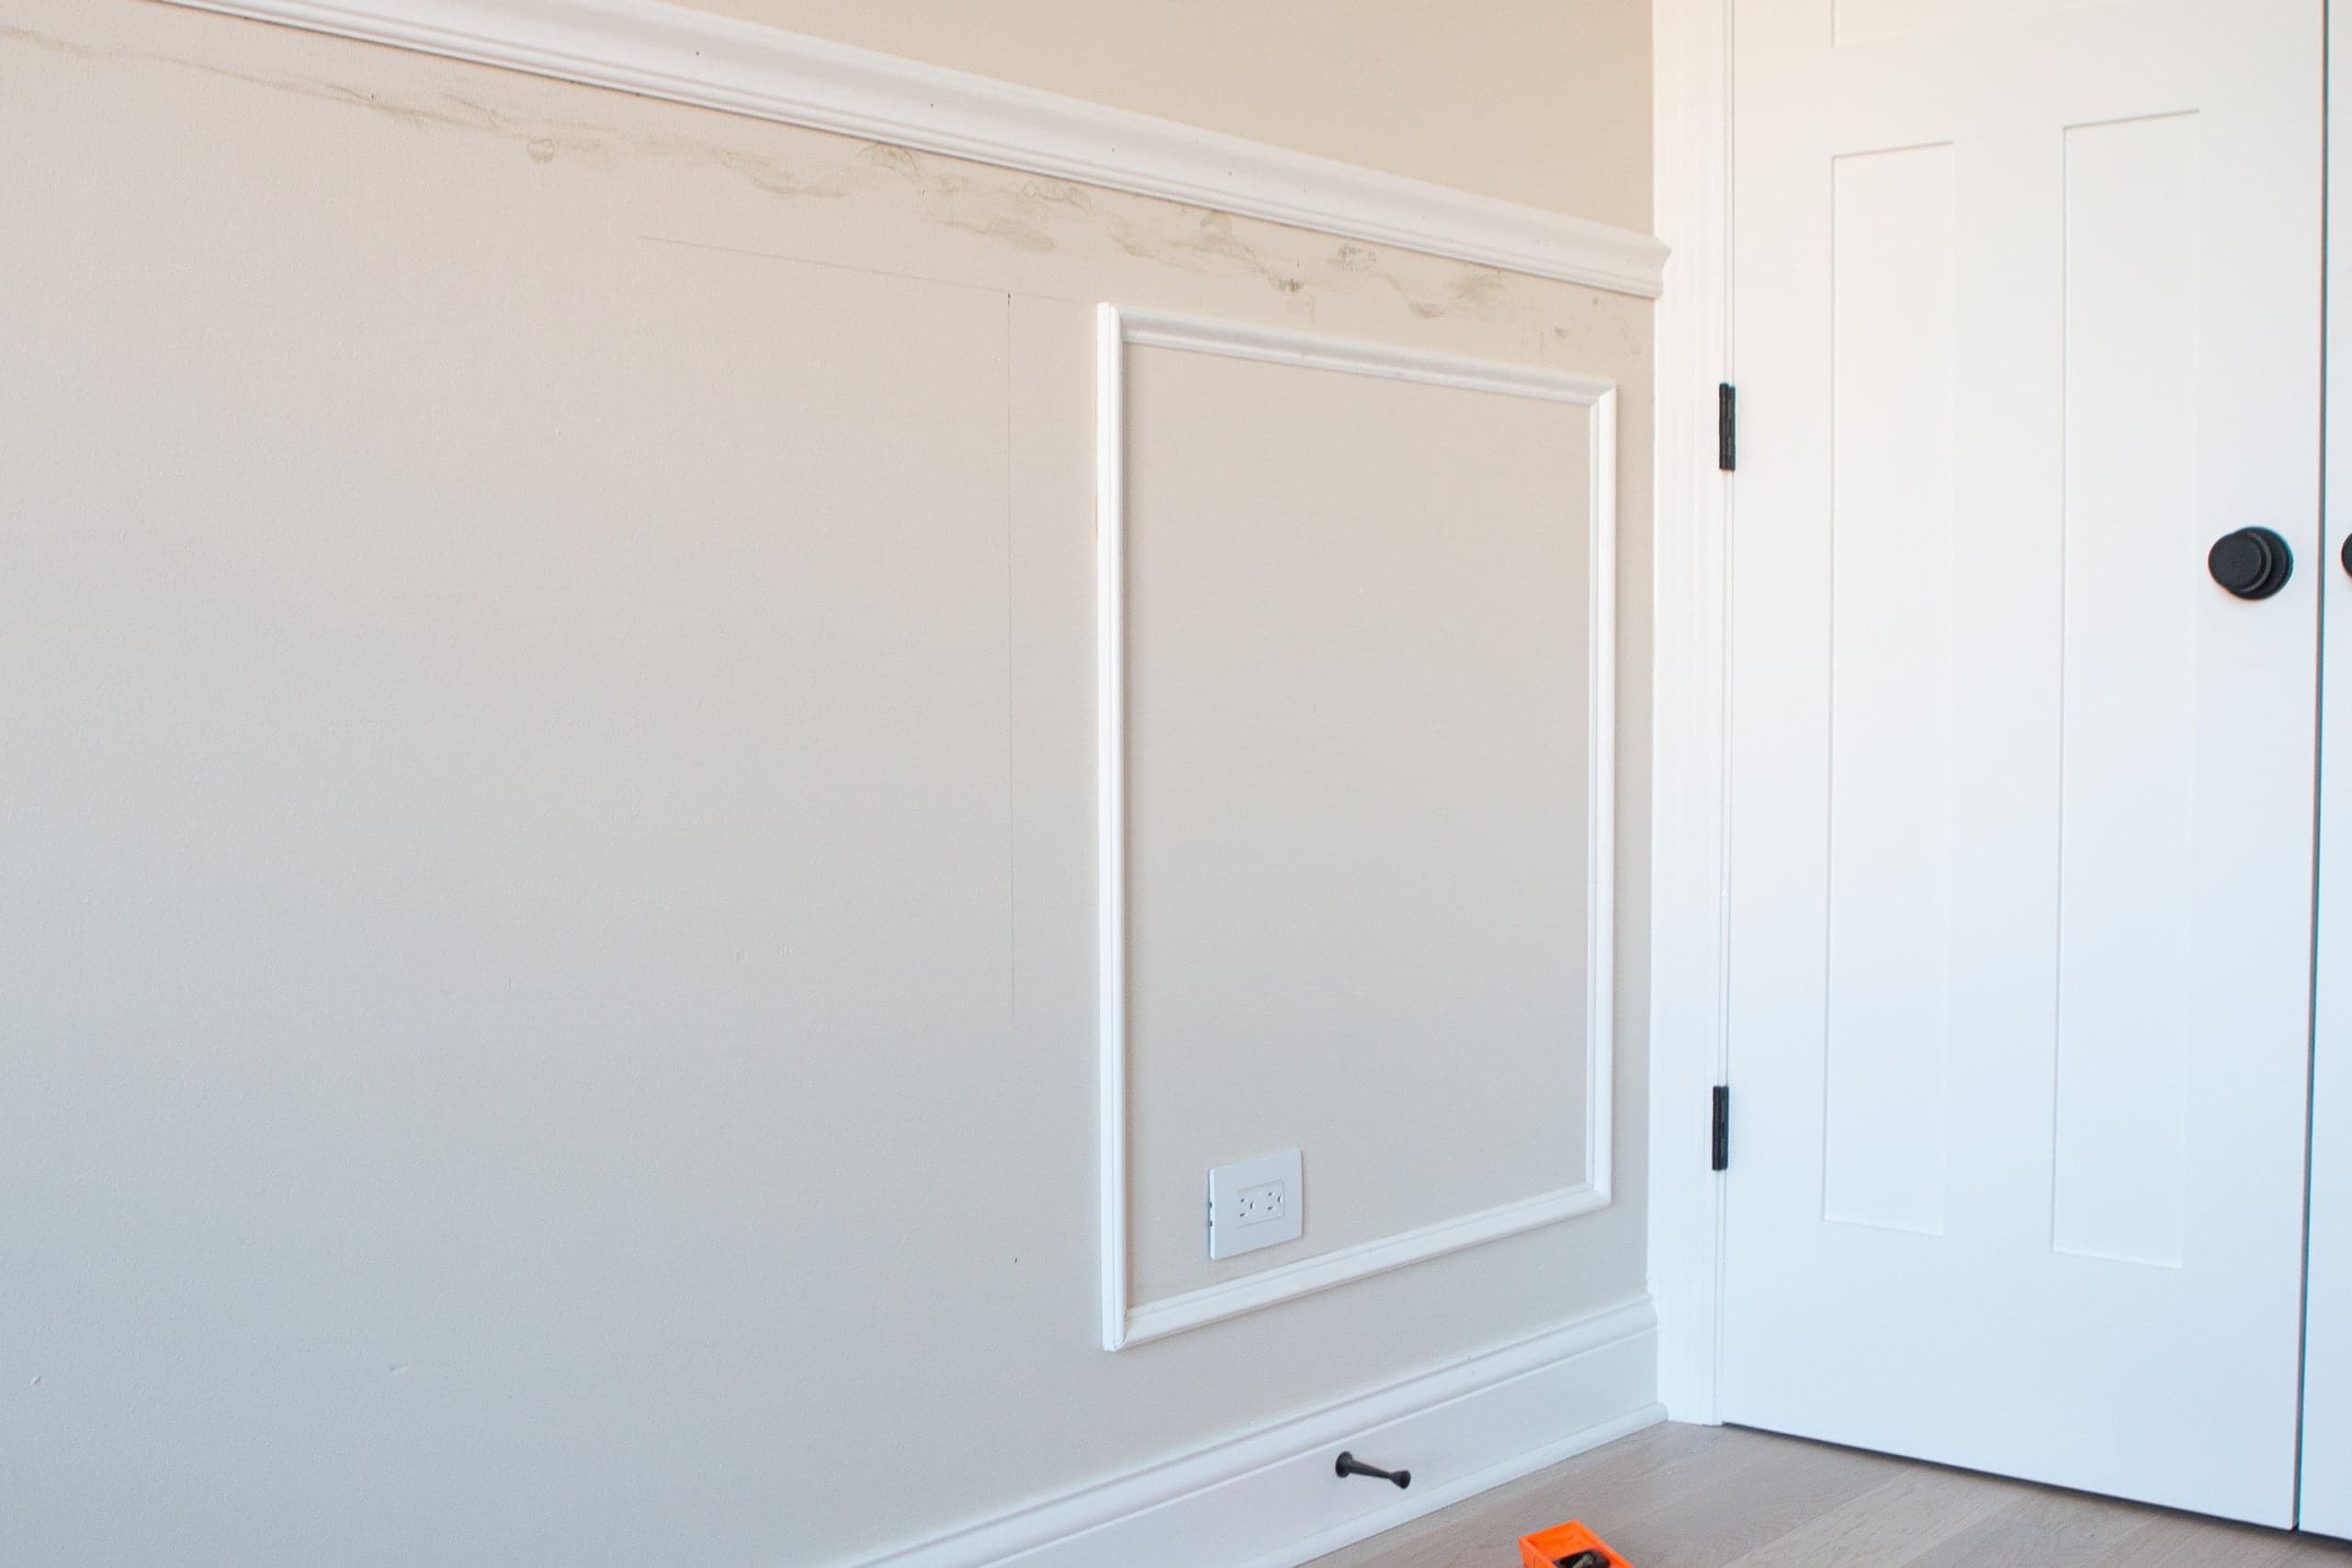 How to add picture frame molding underneath chair rail